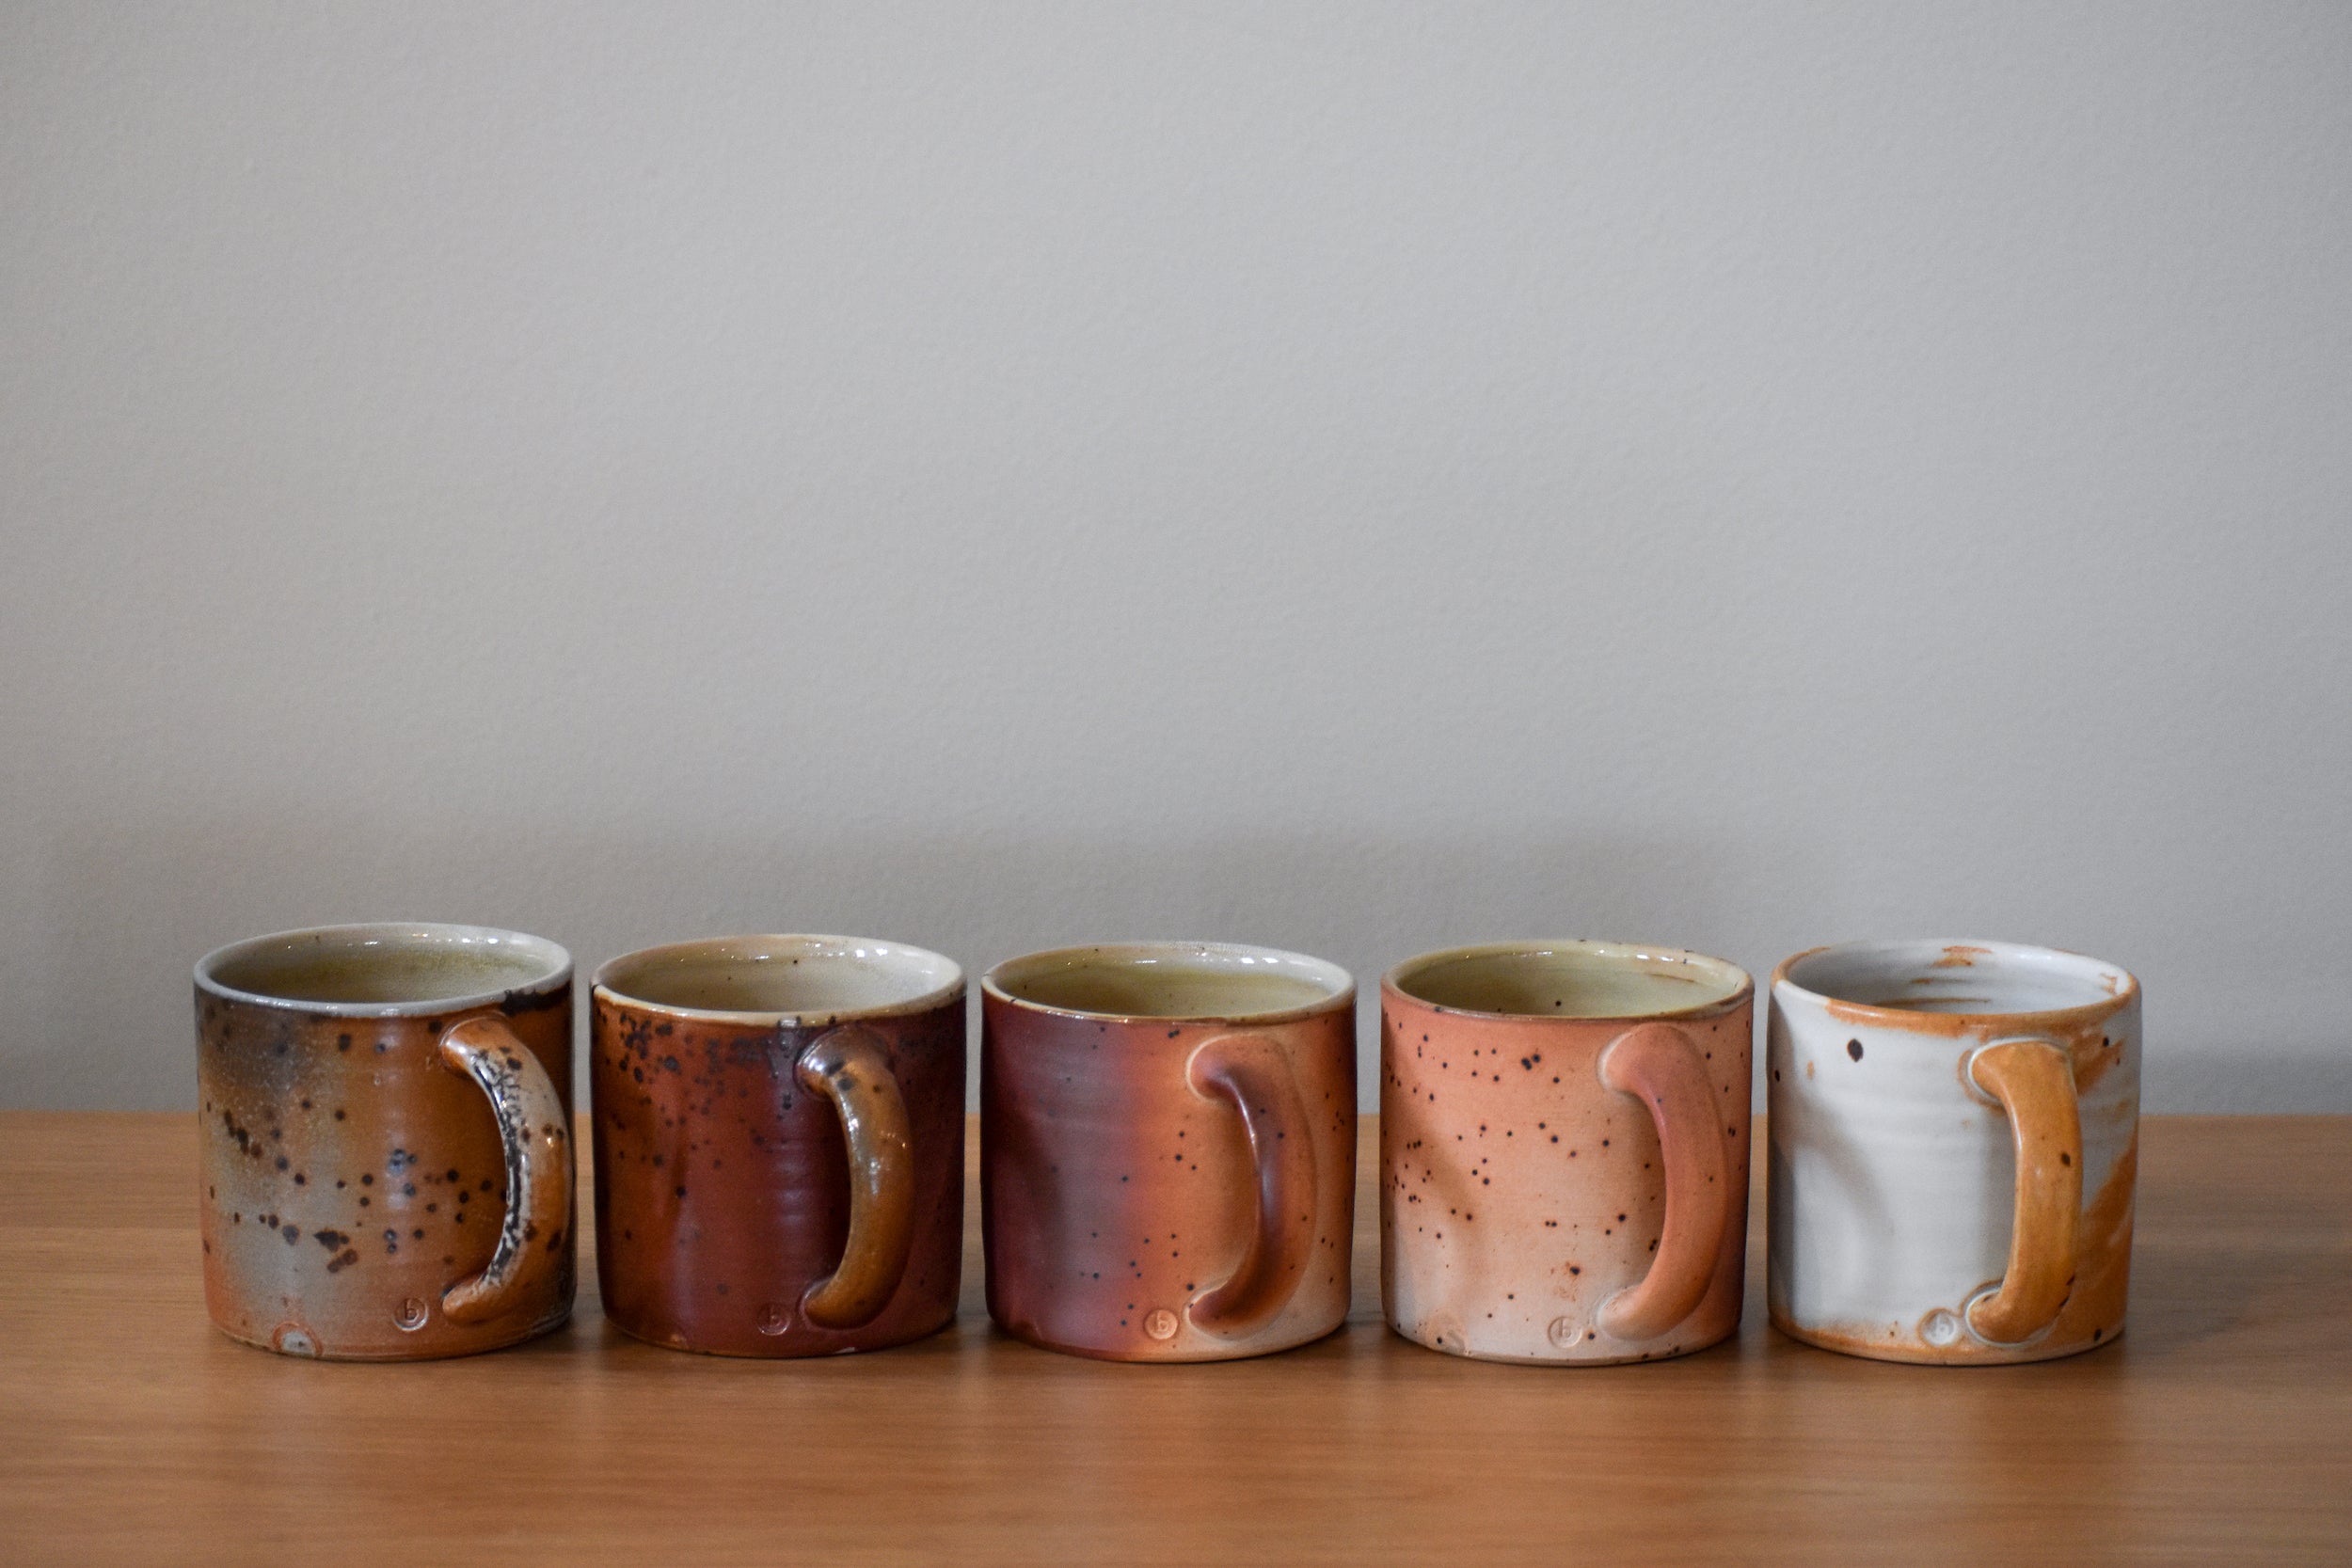 Five speckled, ceramic mugs in various colors